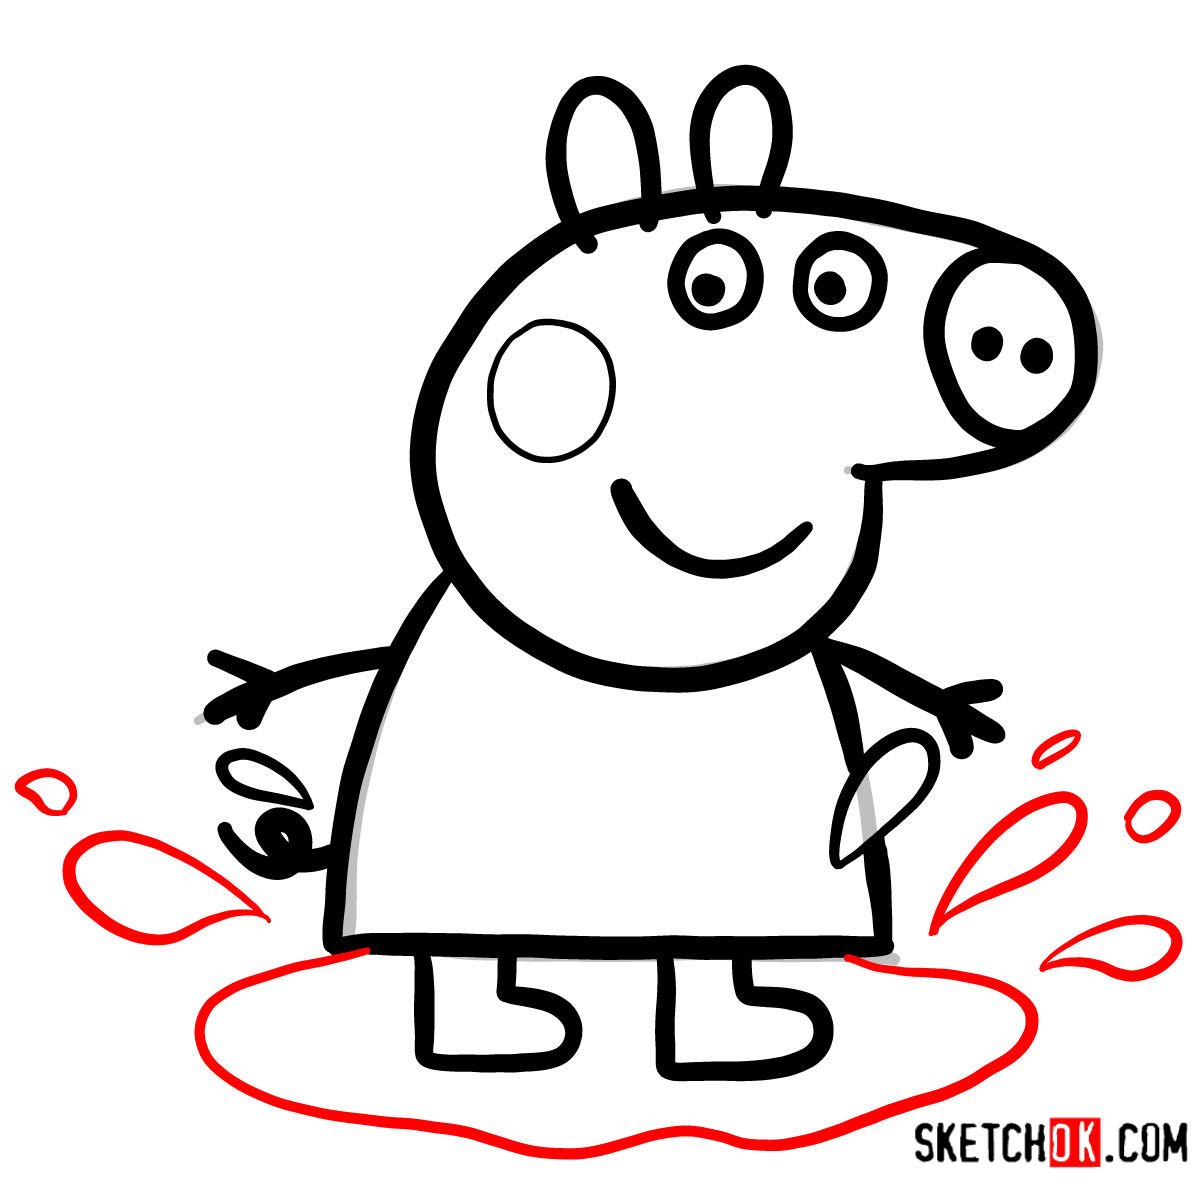 How to draw Peppa Pig in the mud puddle - step 08